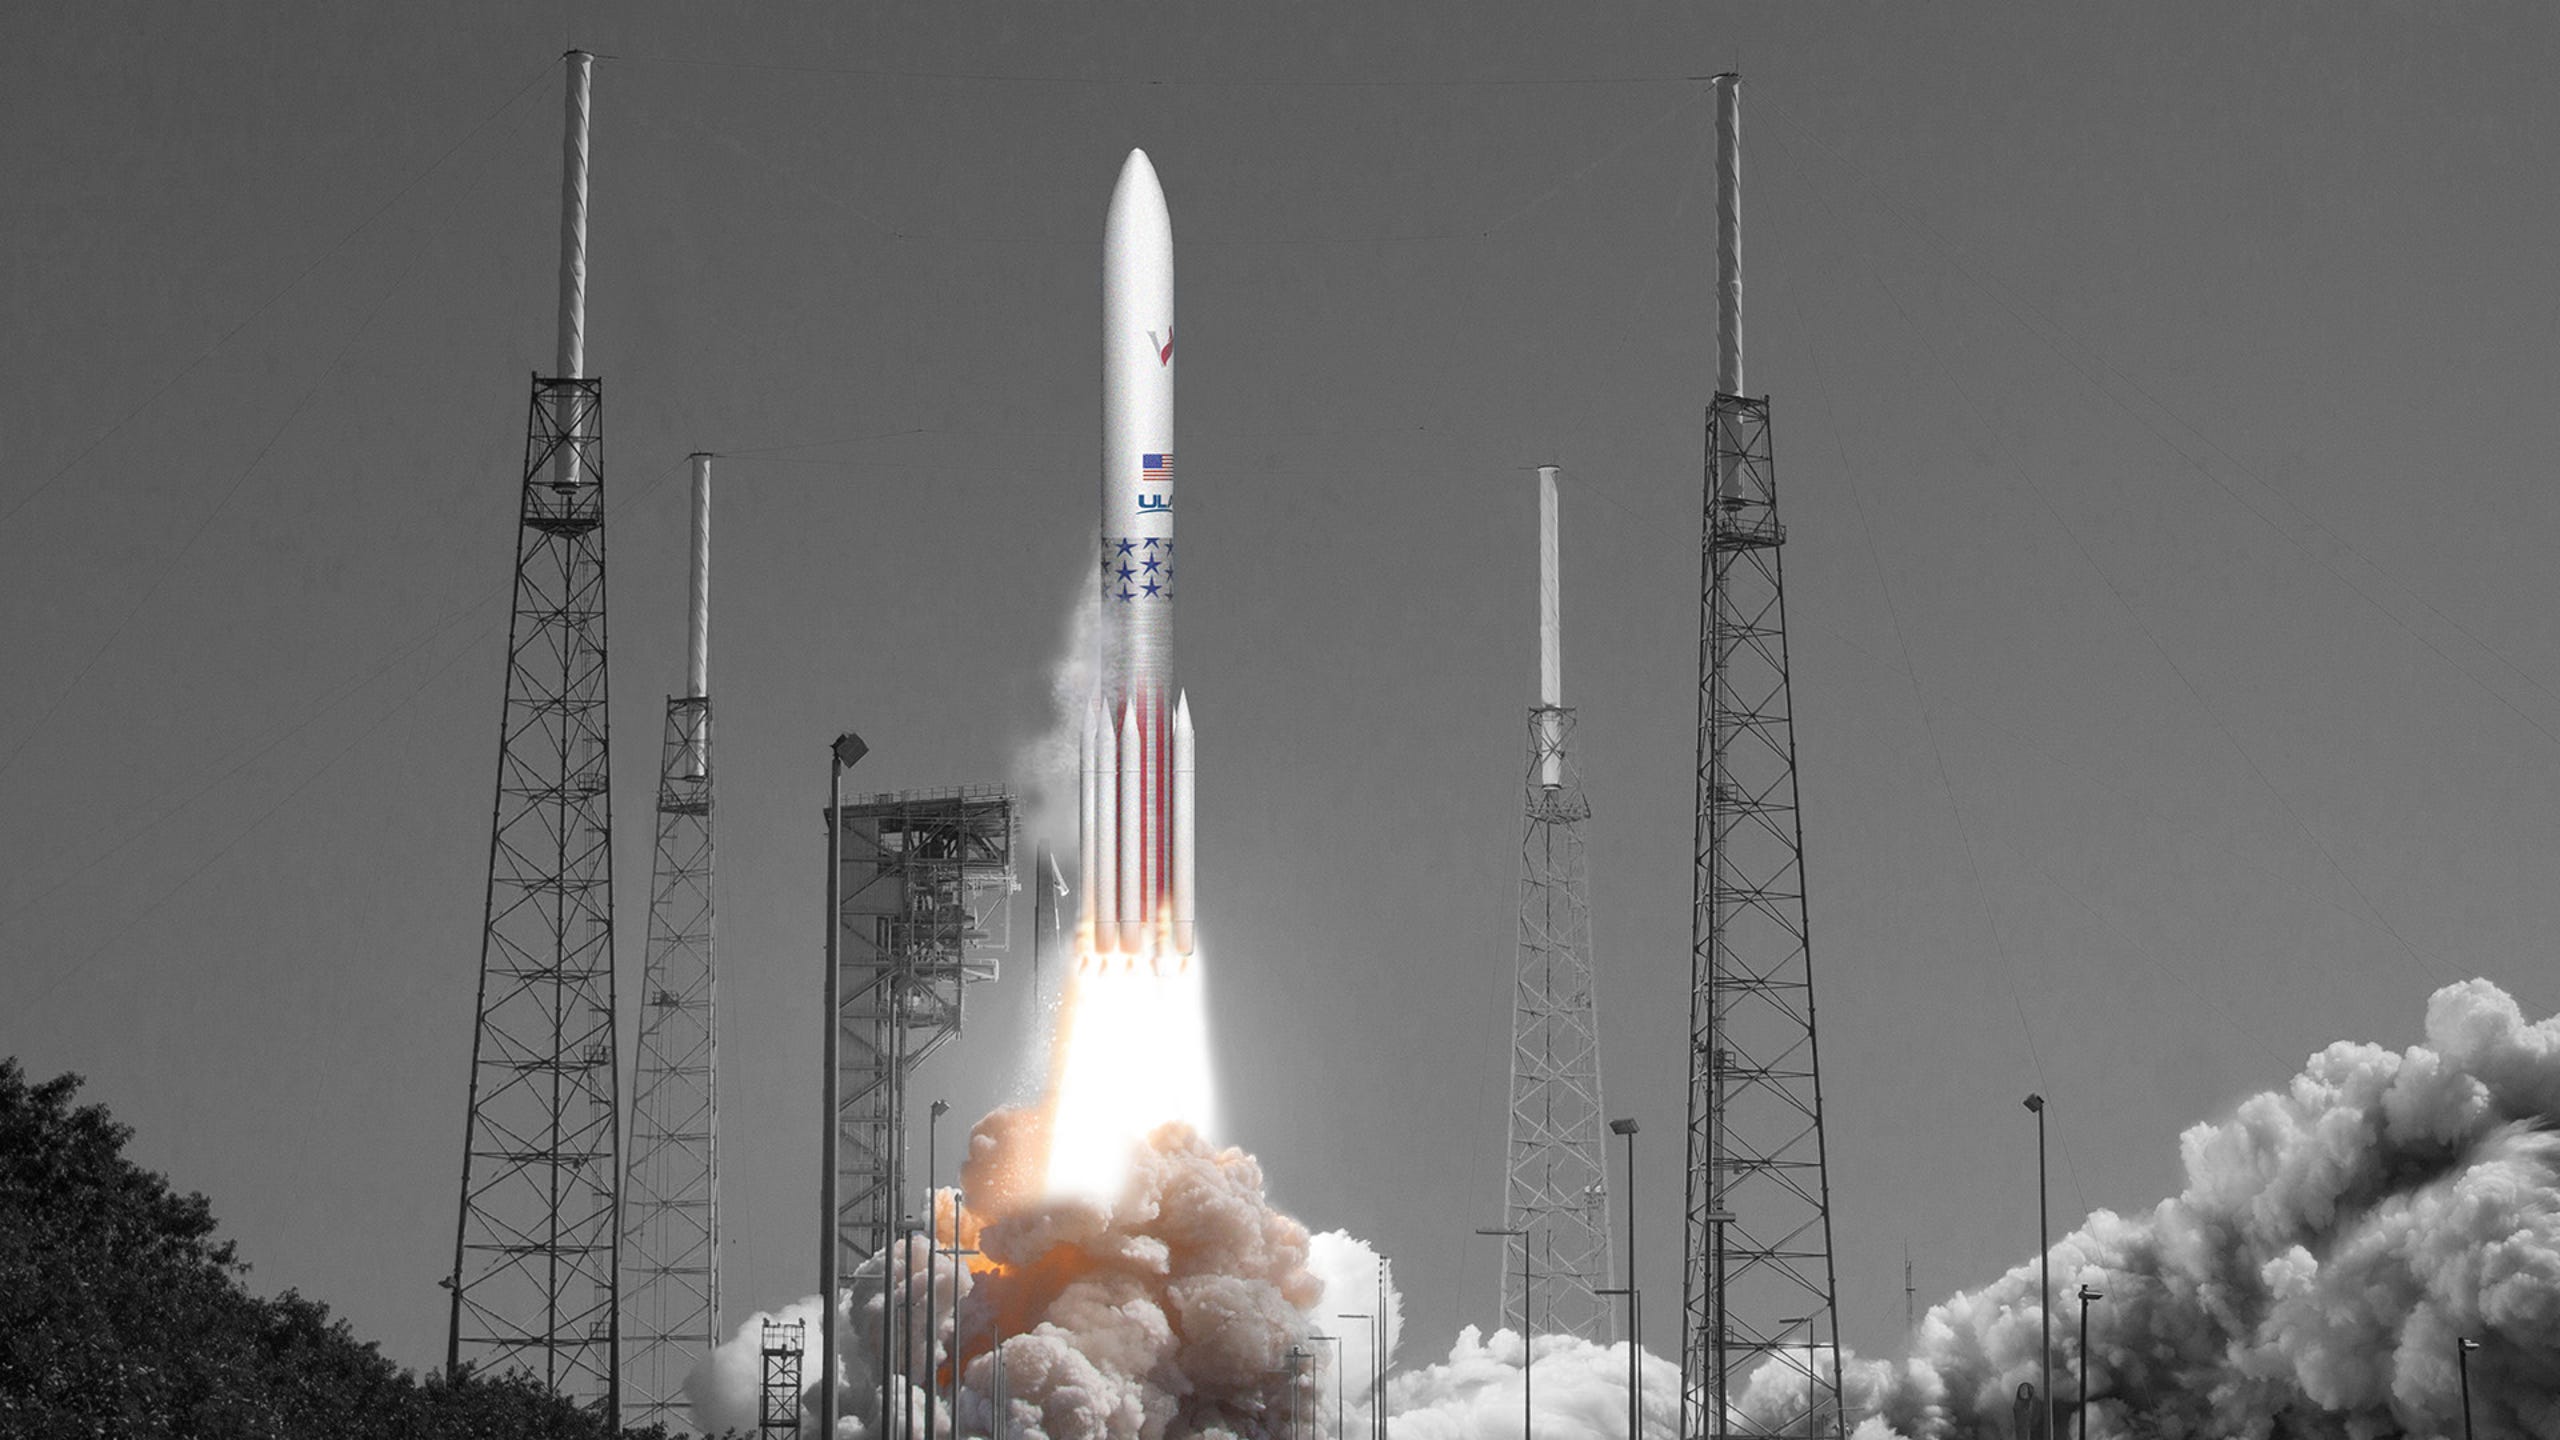 Artist rendering of United Launch Alliance's Vulcan rocket blasting off from Launch Complex 41 at Cape Canaveral Air Force Station.